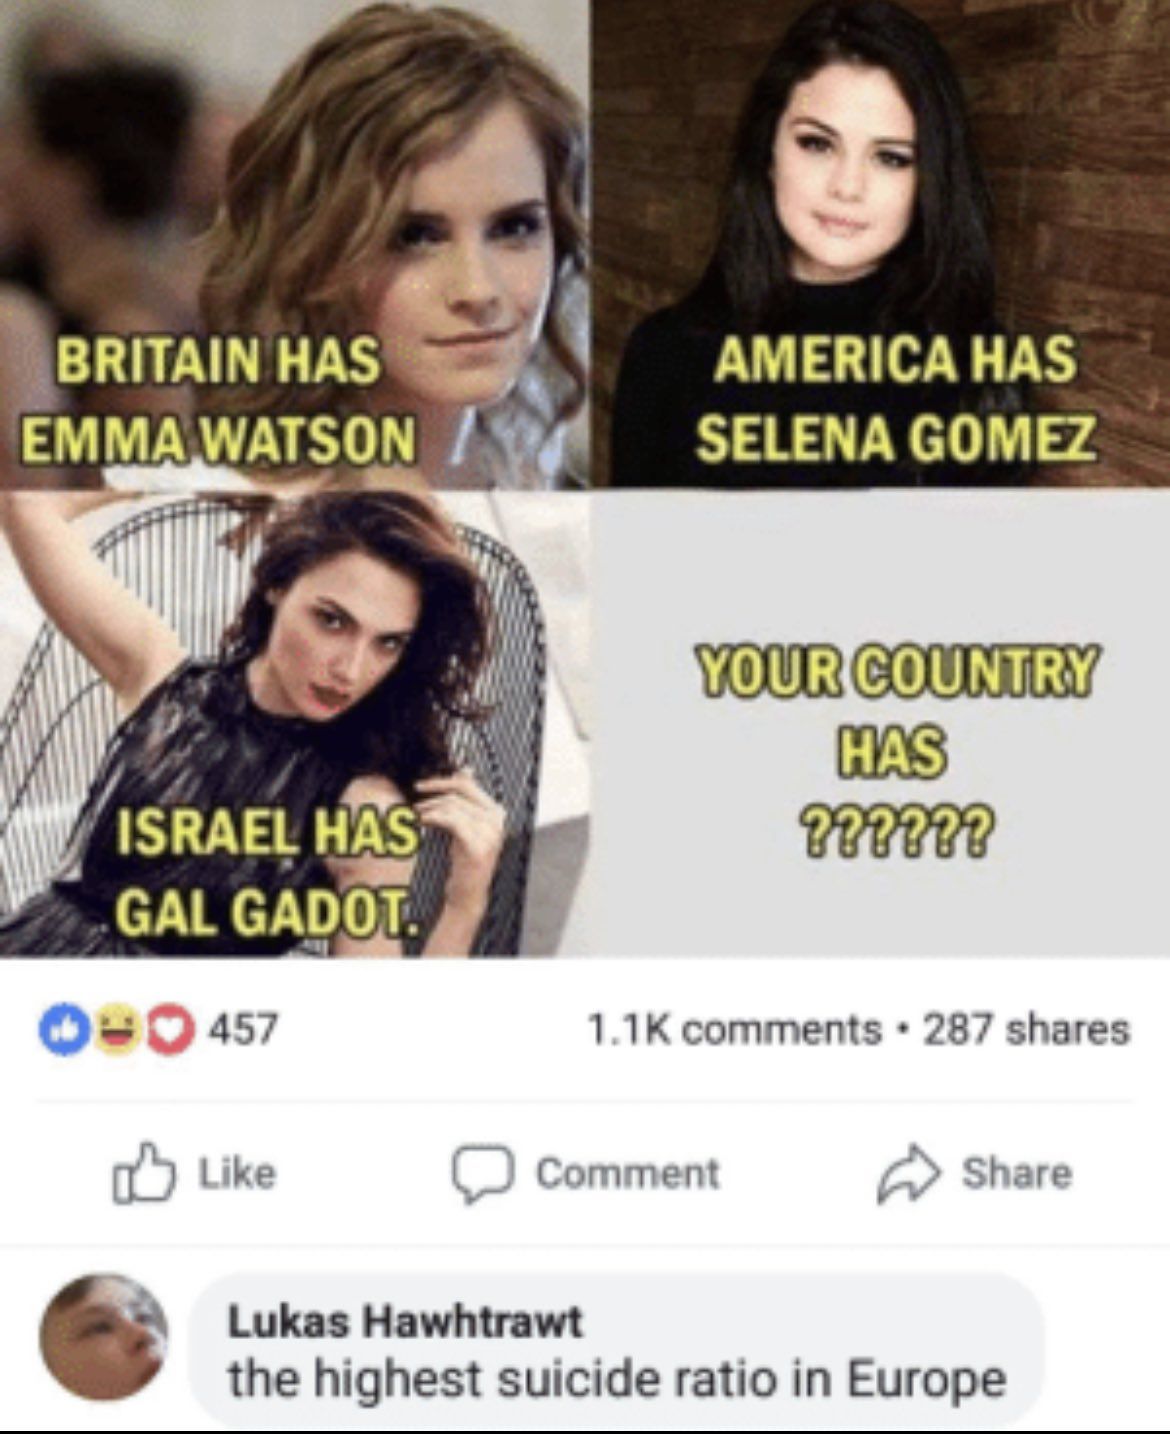 your country has ?